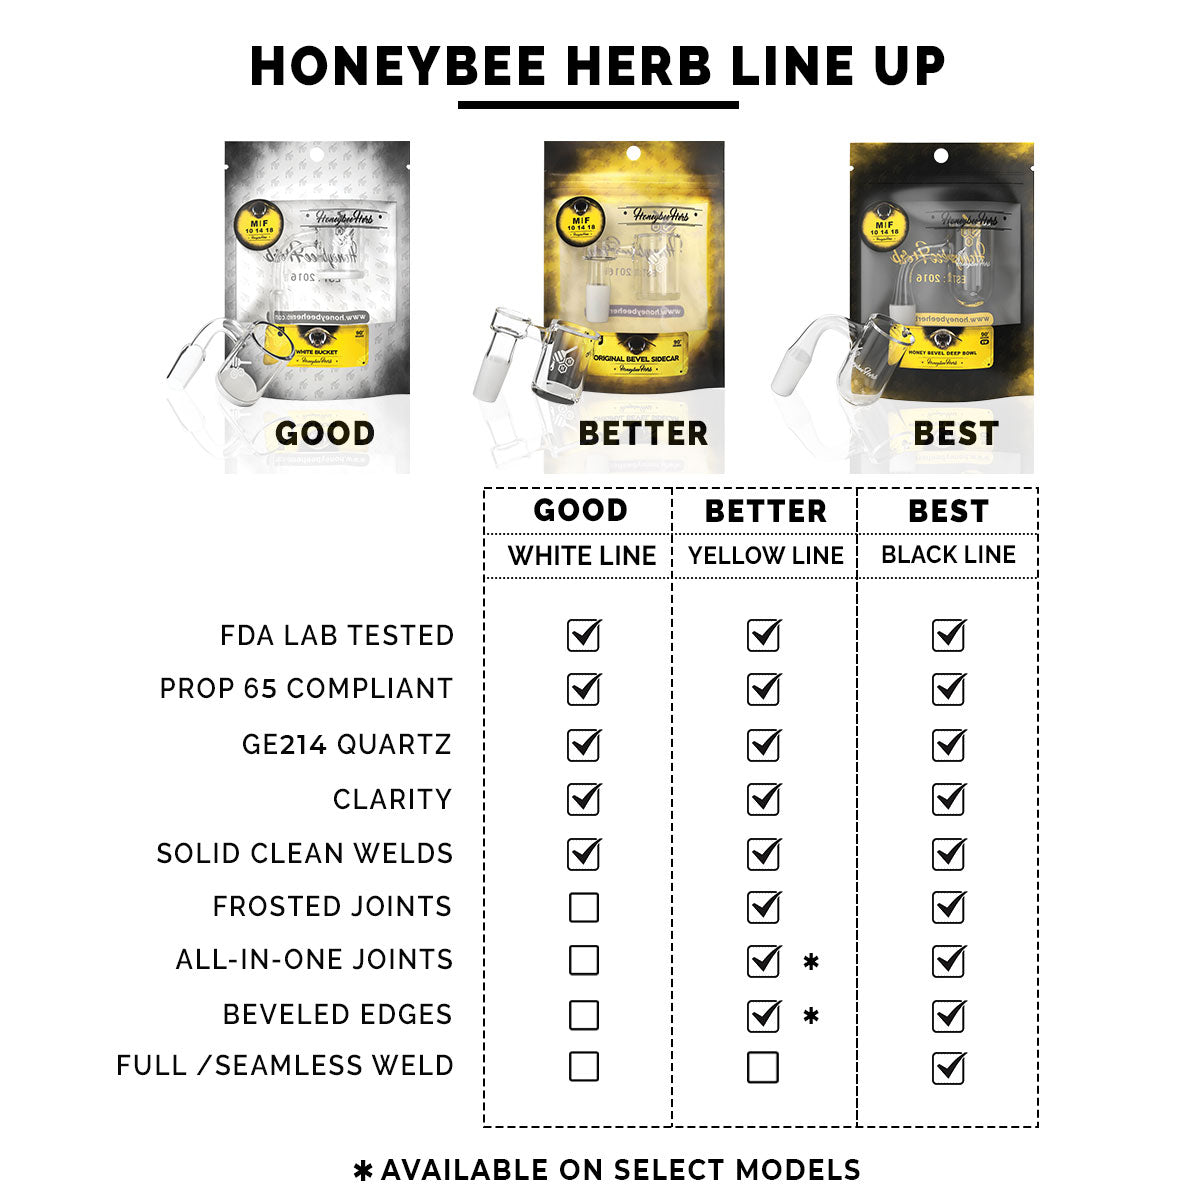 Honeybee Herb quartz banger comparison chart for dab rigs, showing features from Good to Best